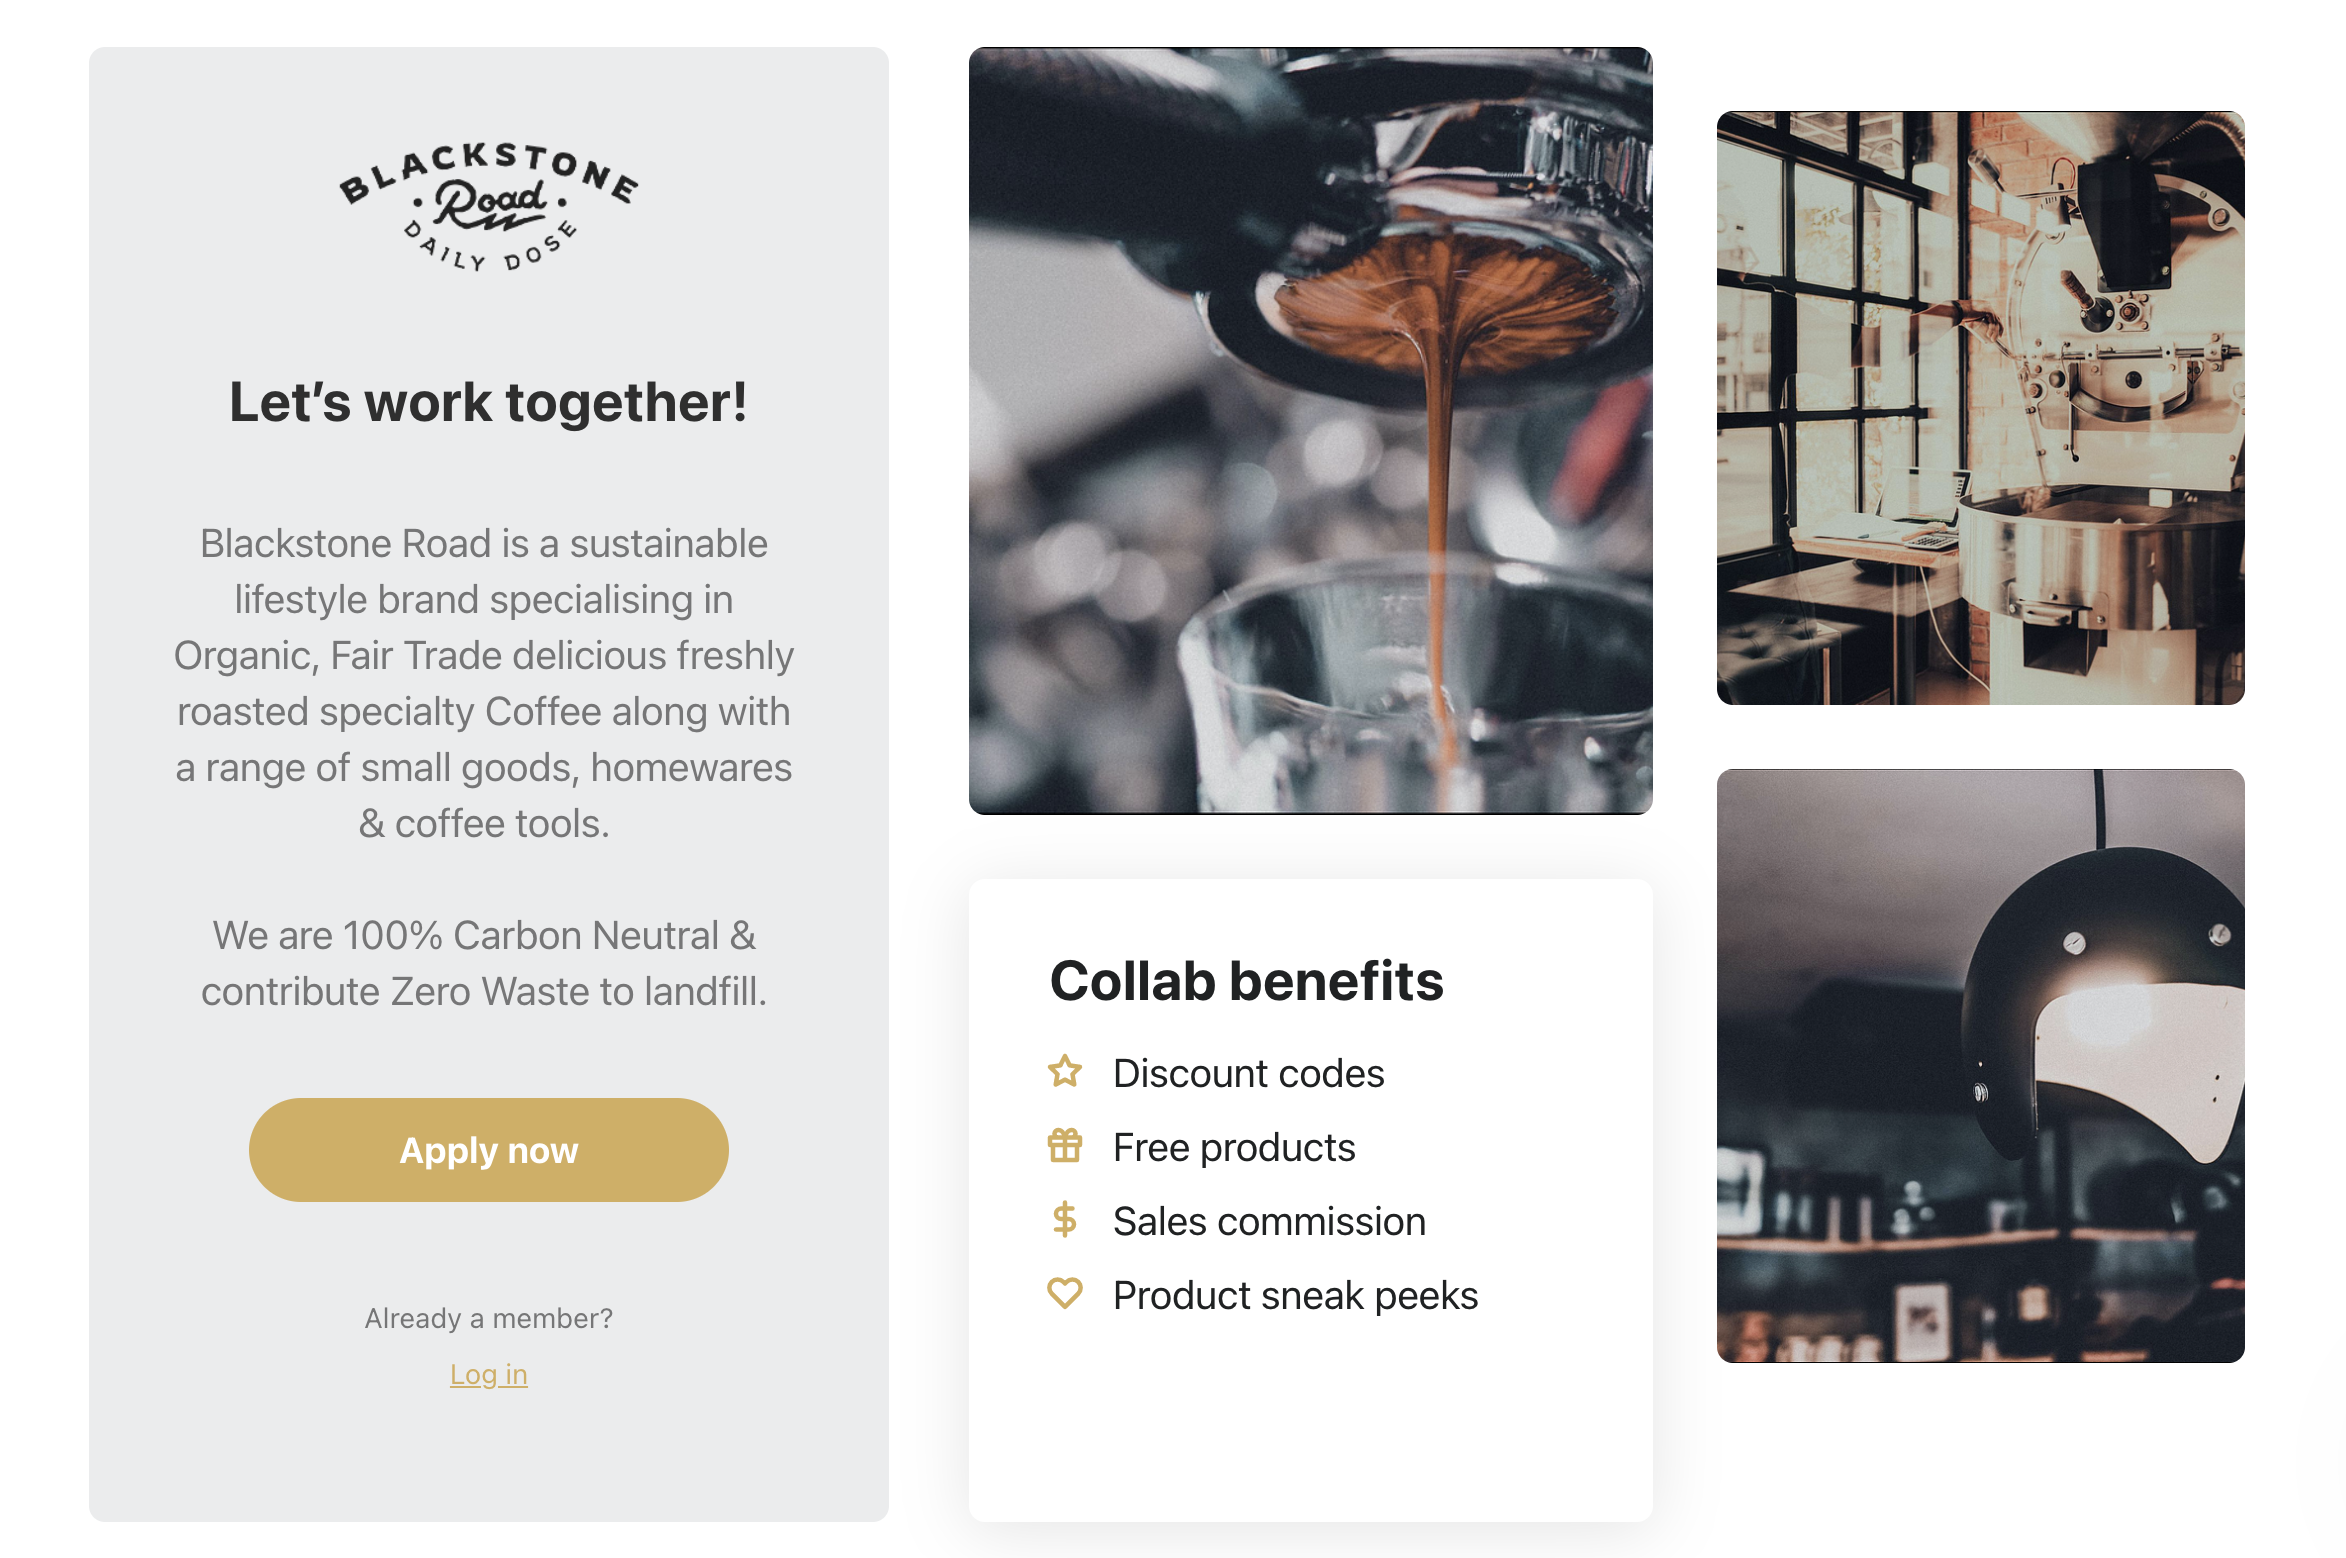 A screenshot from Blackstone Road's coffee ecommerce website, showing information about the brand's affiliate community.